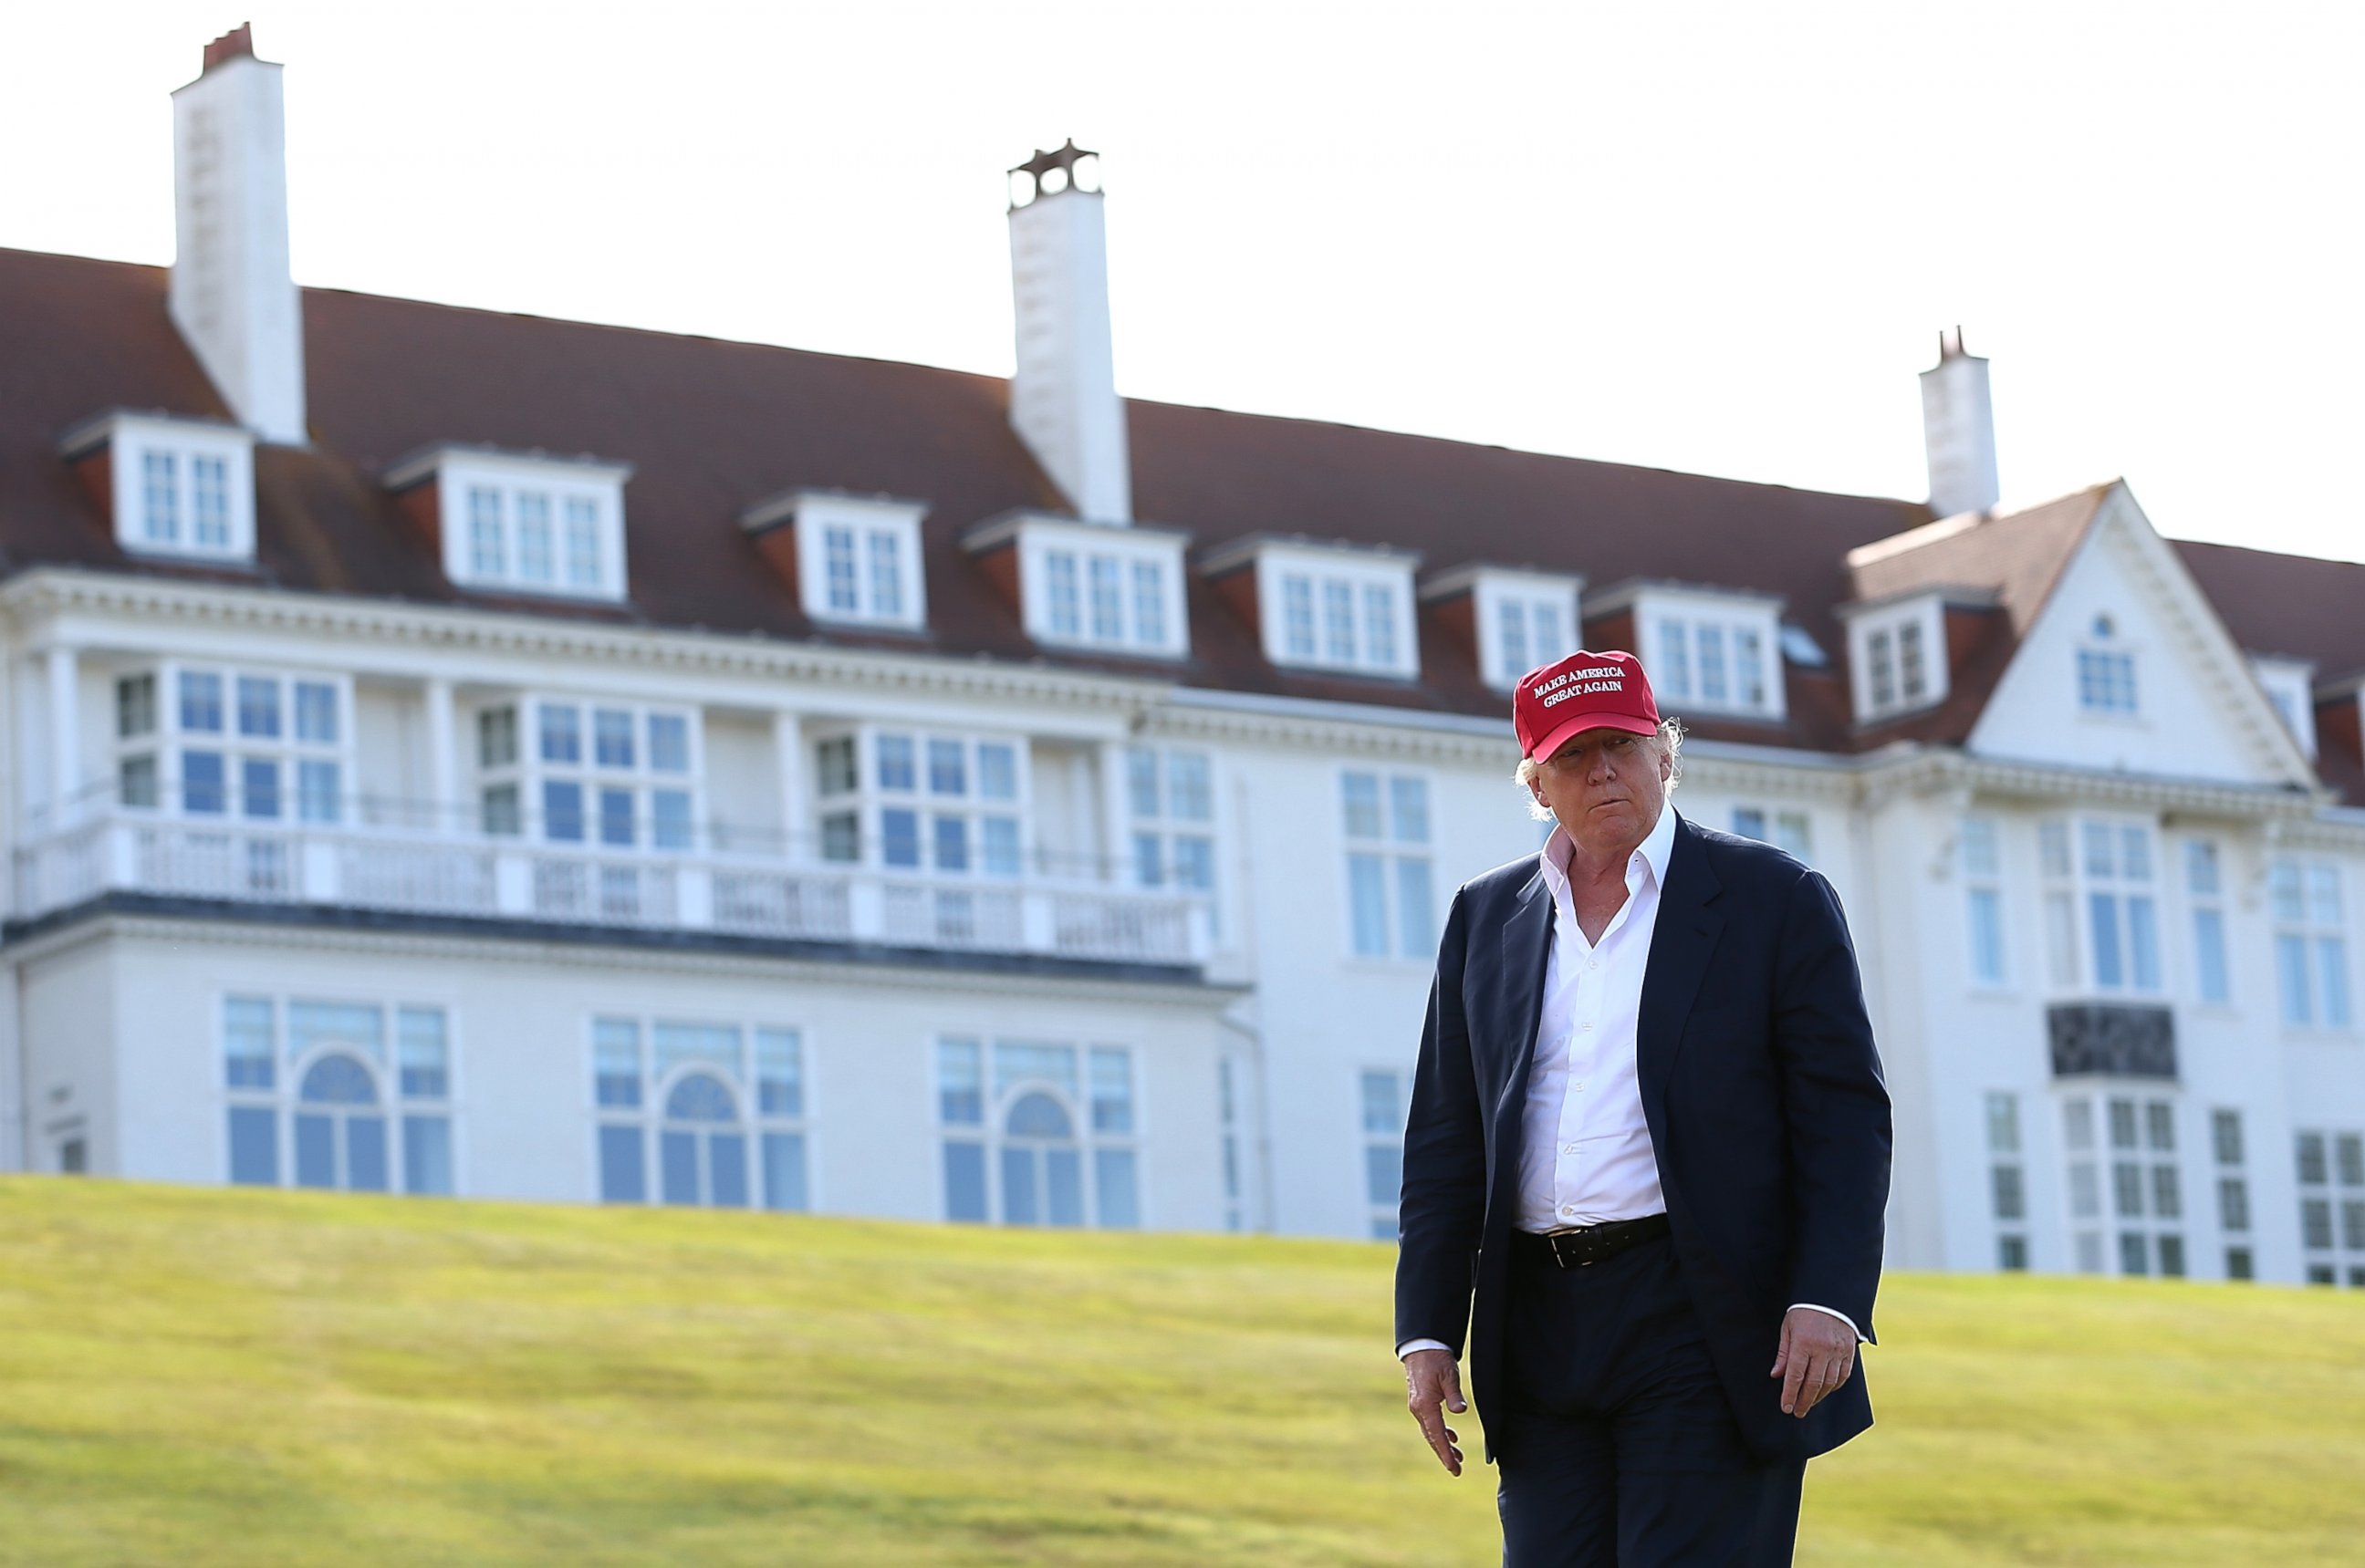 PHOTO: Republican Presidential Candidate Donald Trump visits his Scottish golf course Turnberry on July 30, 2015 in Ayr, Scotland. 